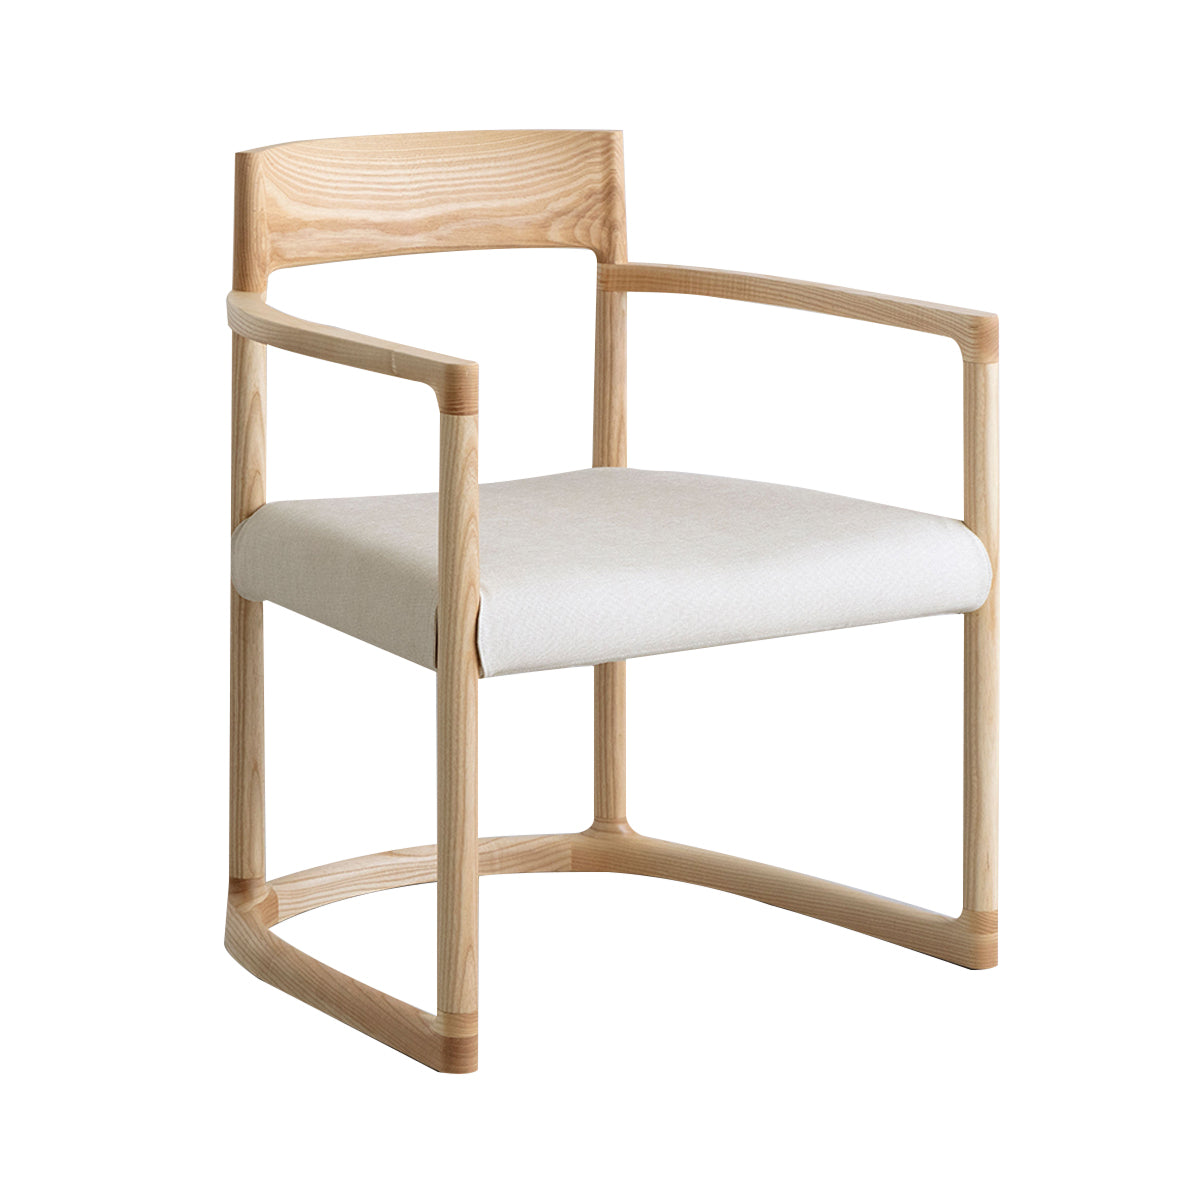 Sweepy Lounge Chair: Upholstered + Natural Ash